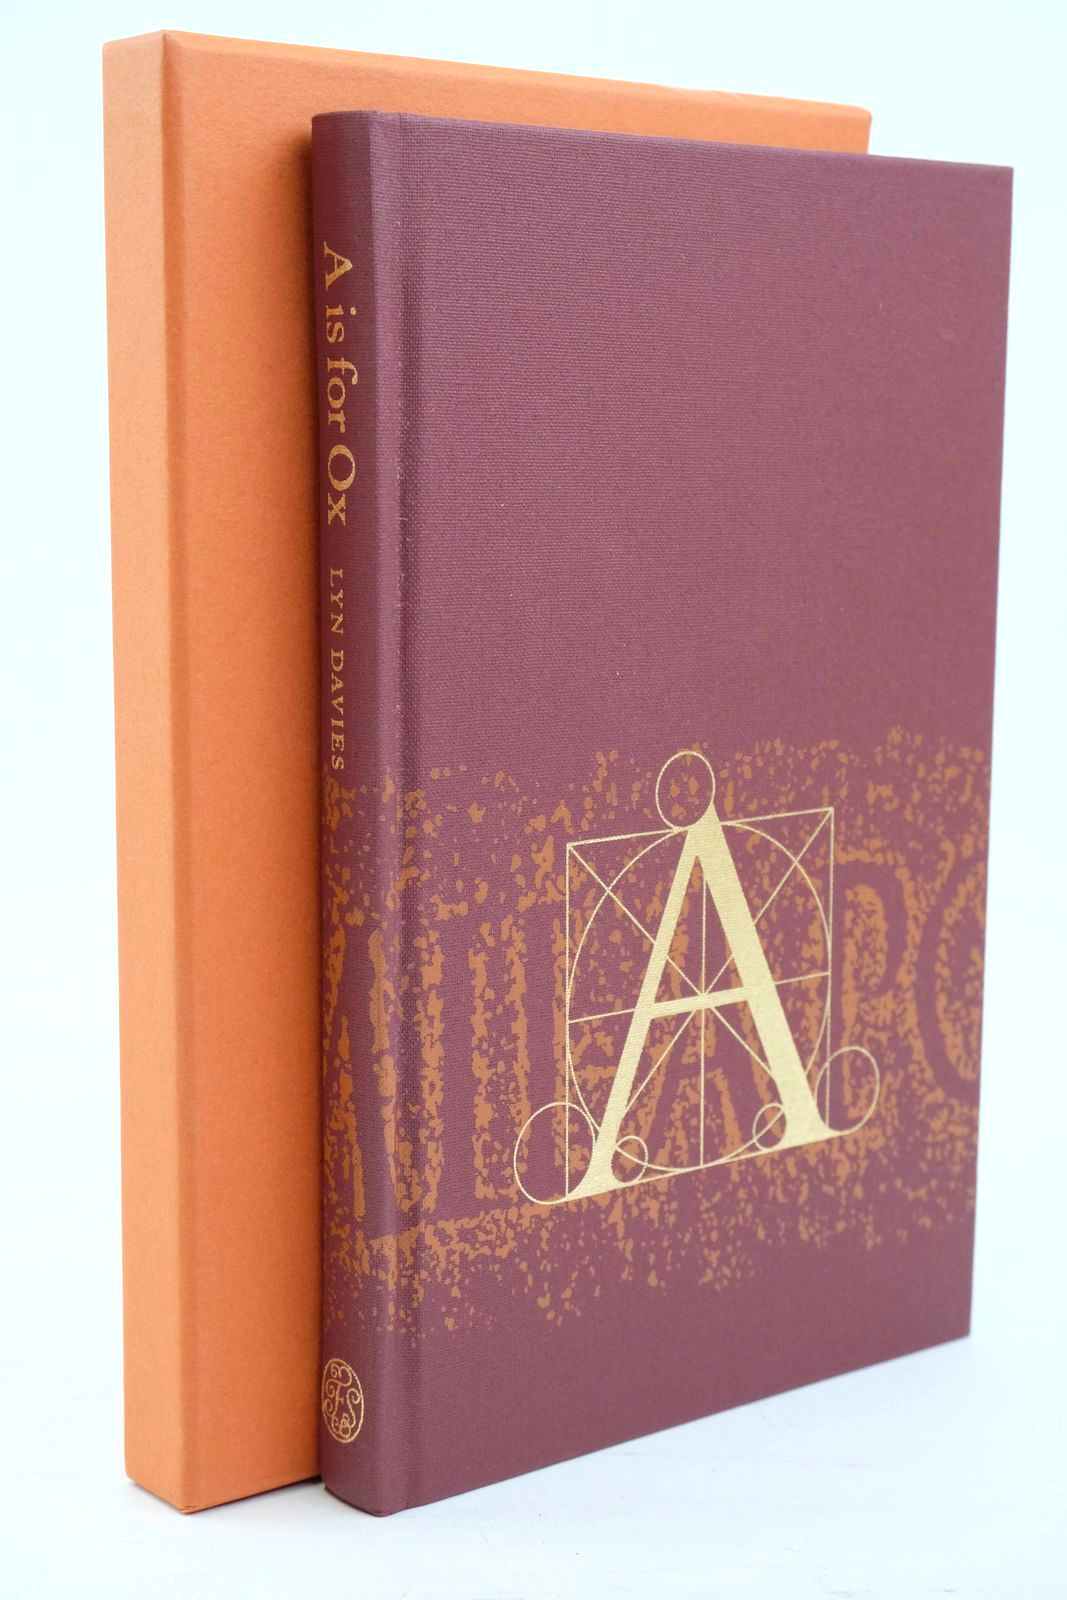 Photo of A IS FOR OX written by Davies, Lyn published by Folio Society (STOCK CODE: 1321050)  for sale by Stella & Rose's Books